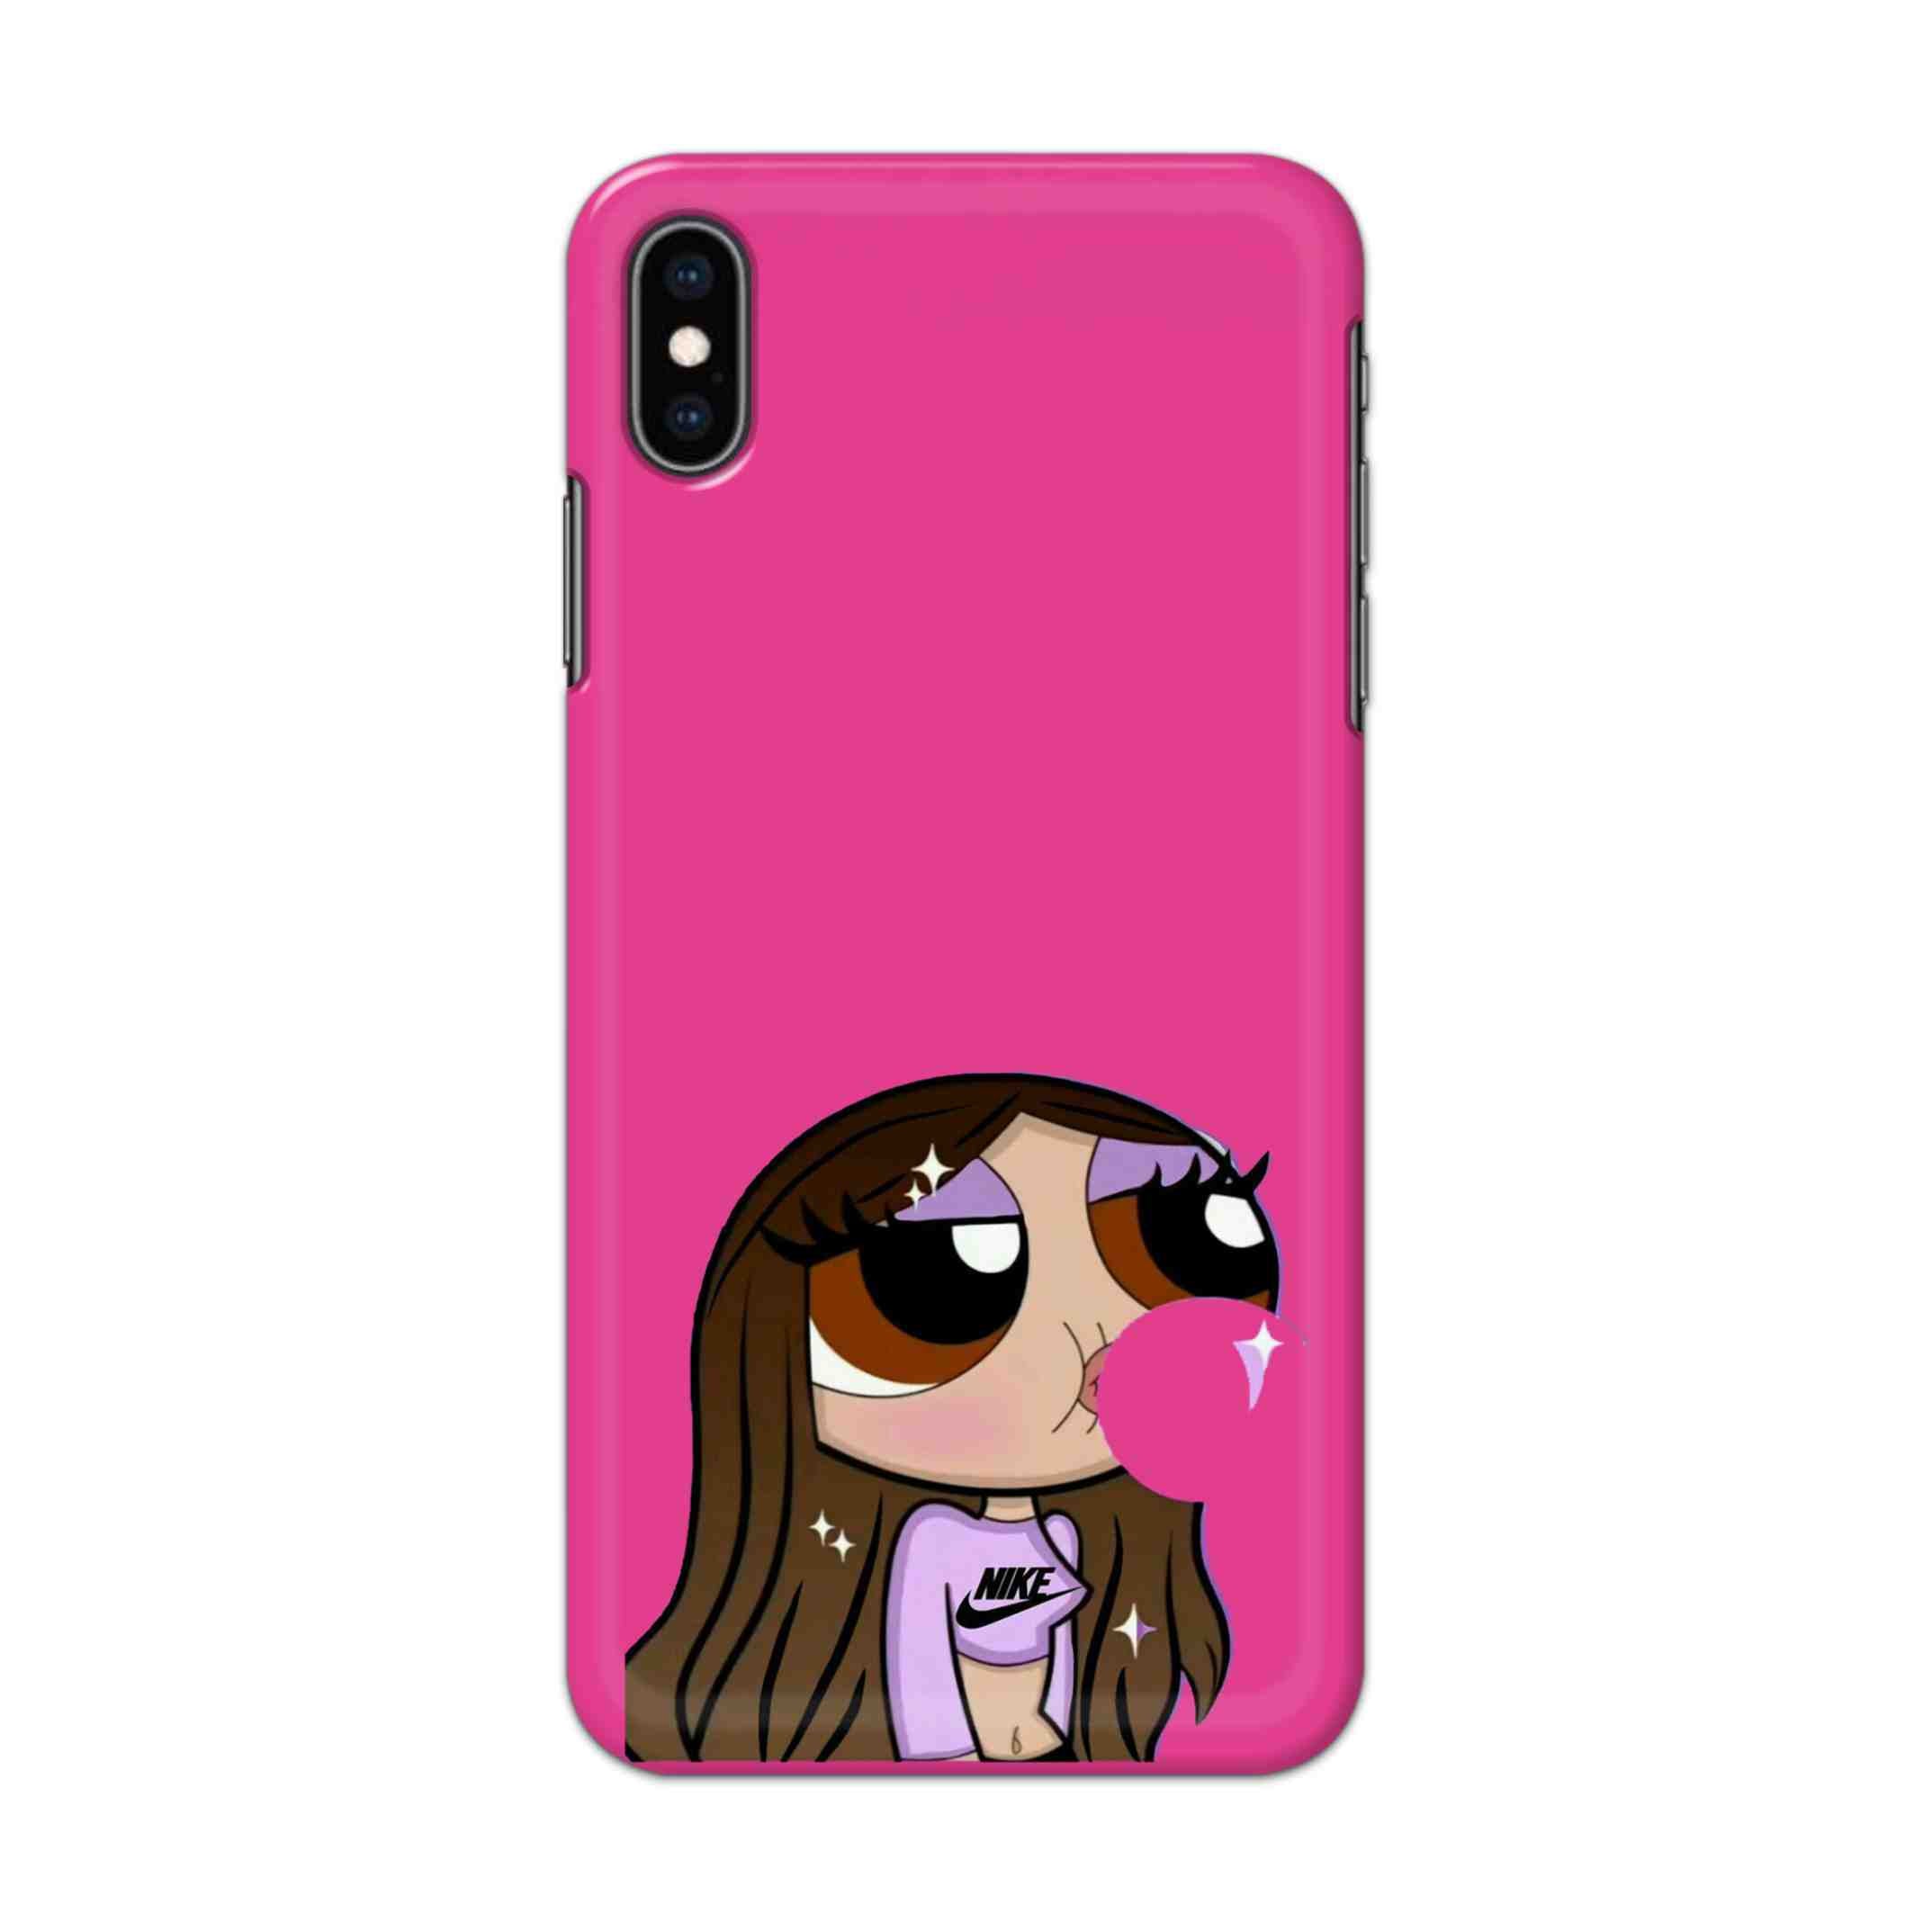 Buy Bubble Girl Hard Back Mobile Phone Case/Cover For iPhone XS MAX Online